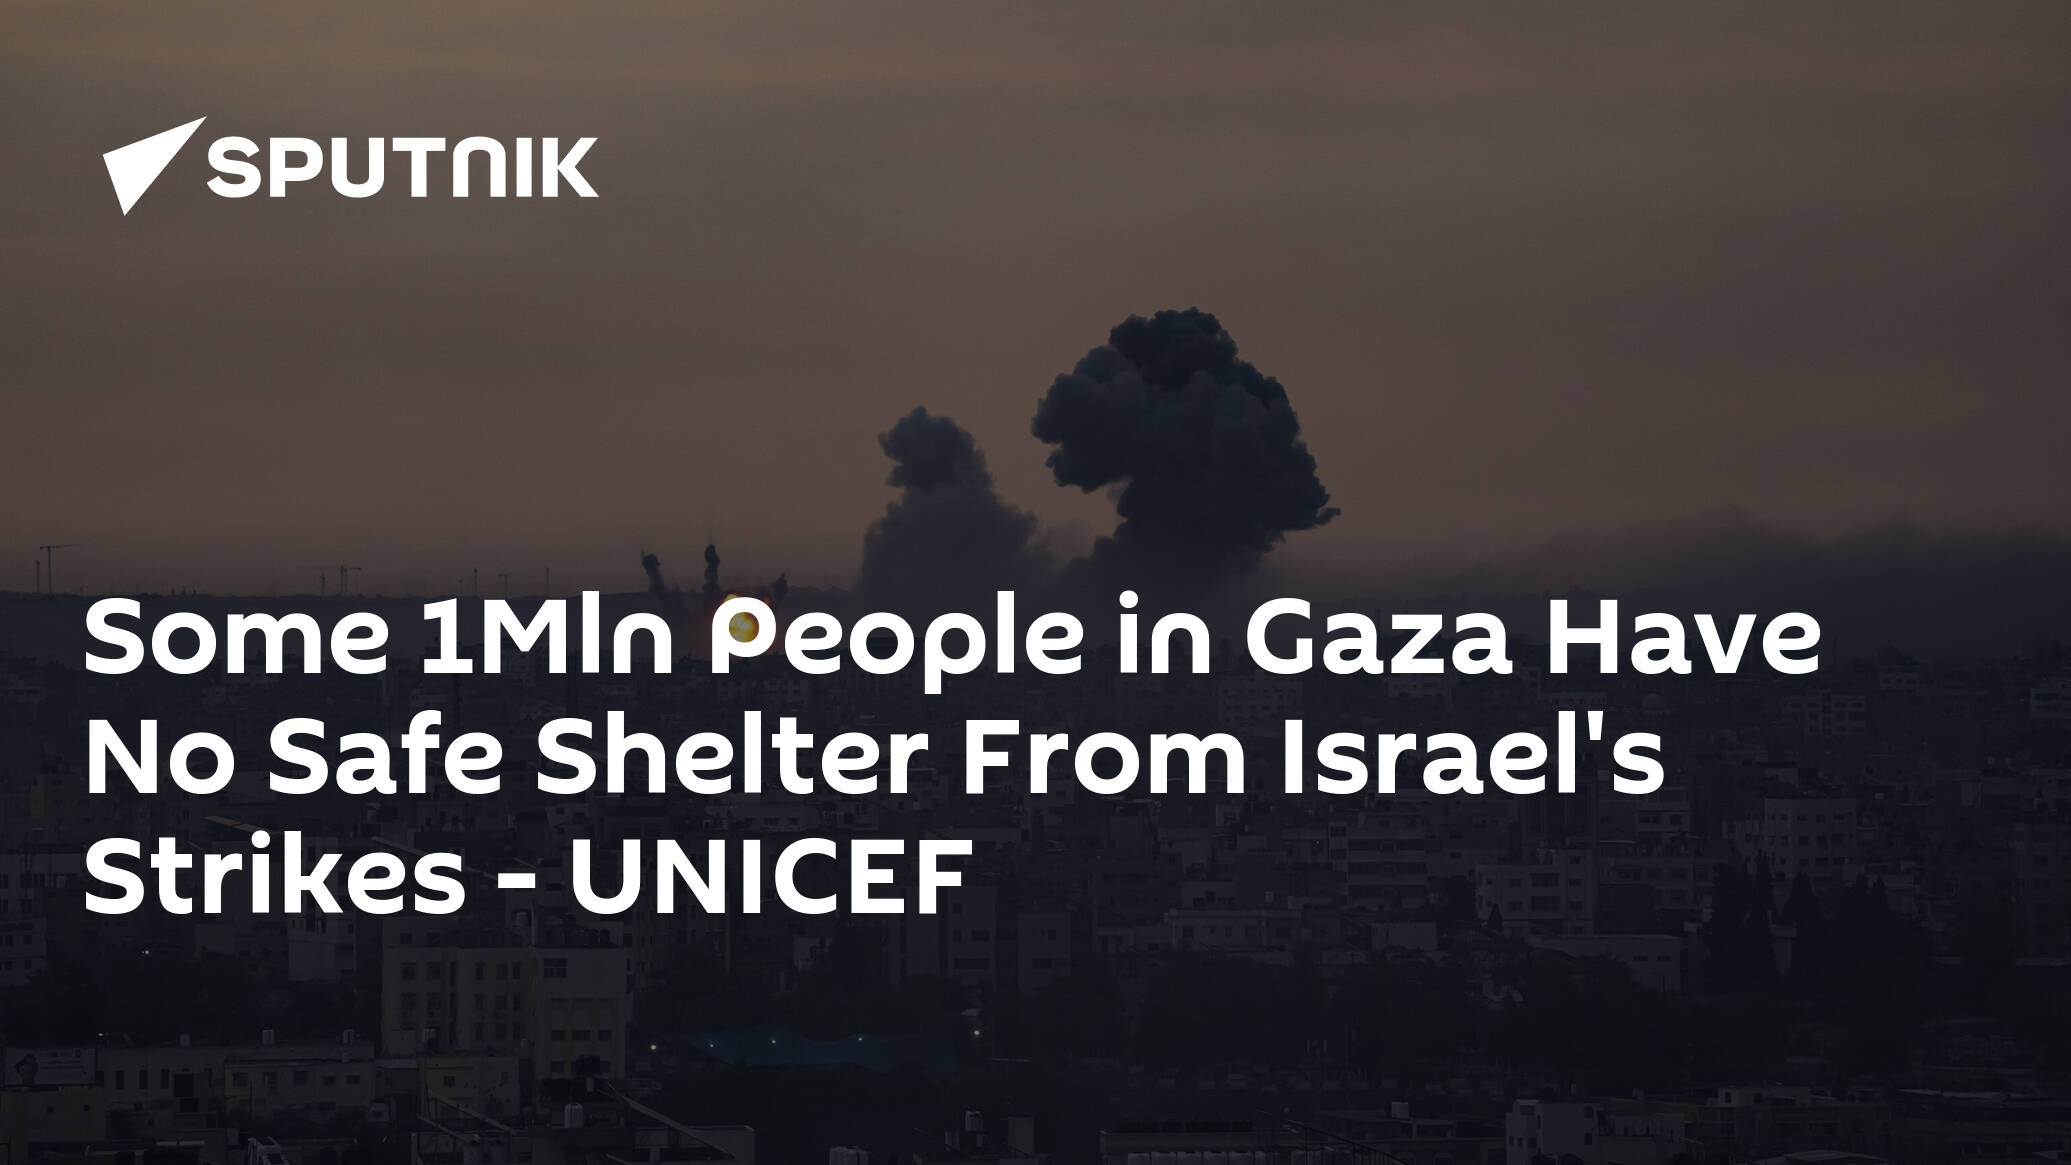 Some 1Mln People in Gaza Have No Safe Shelter From Israel's Strikes – UNICEF